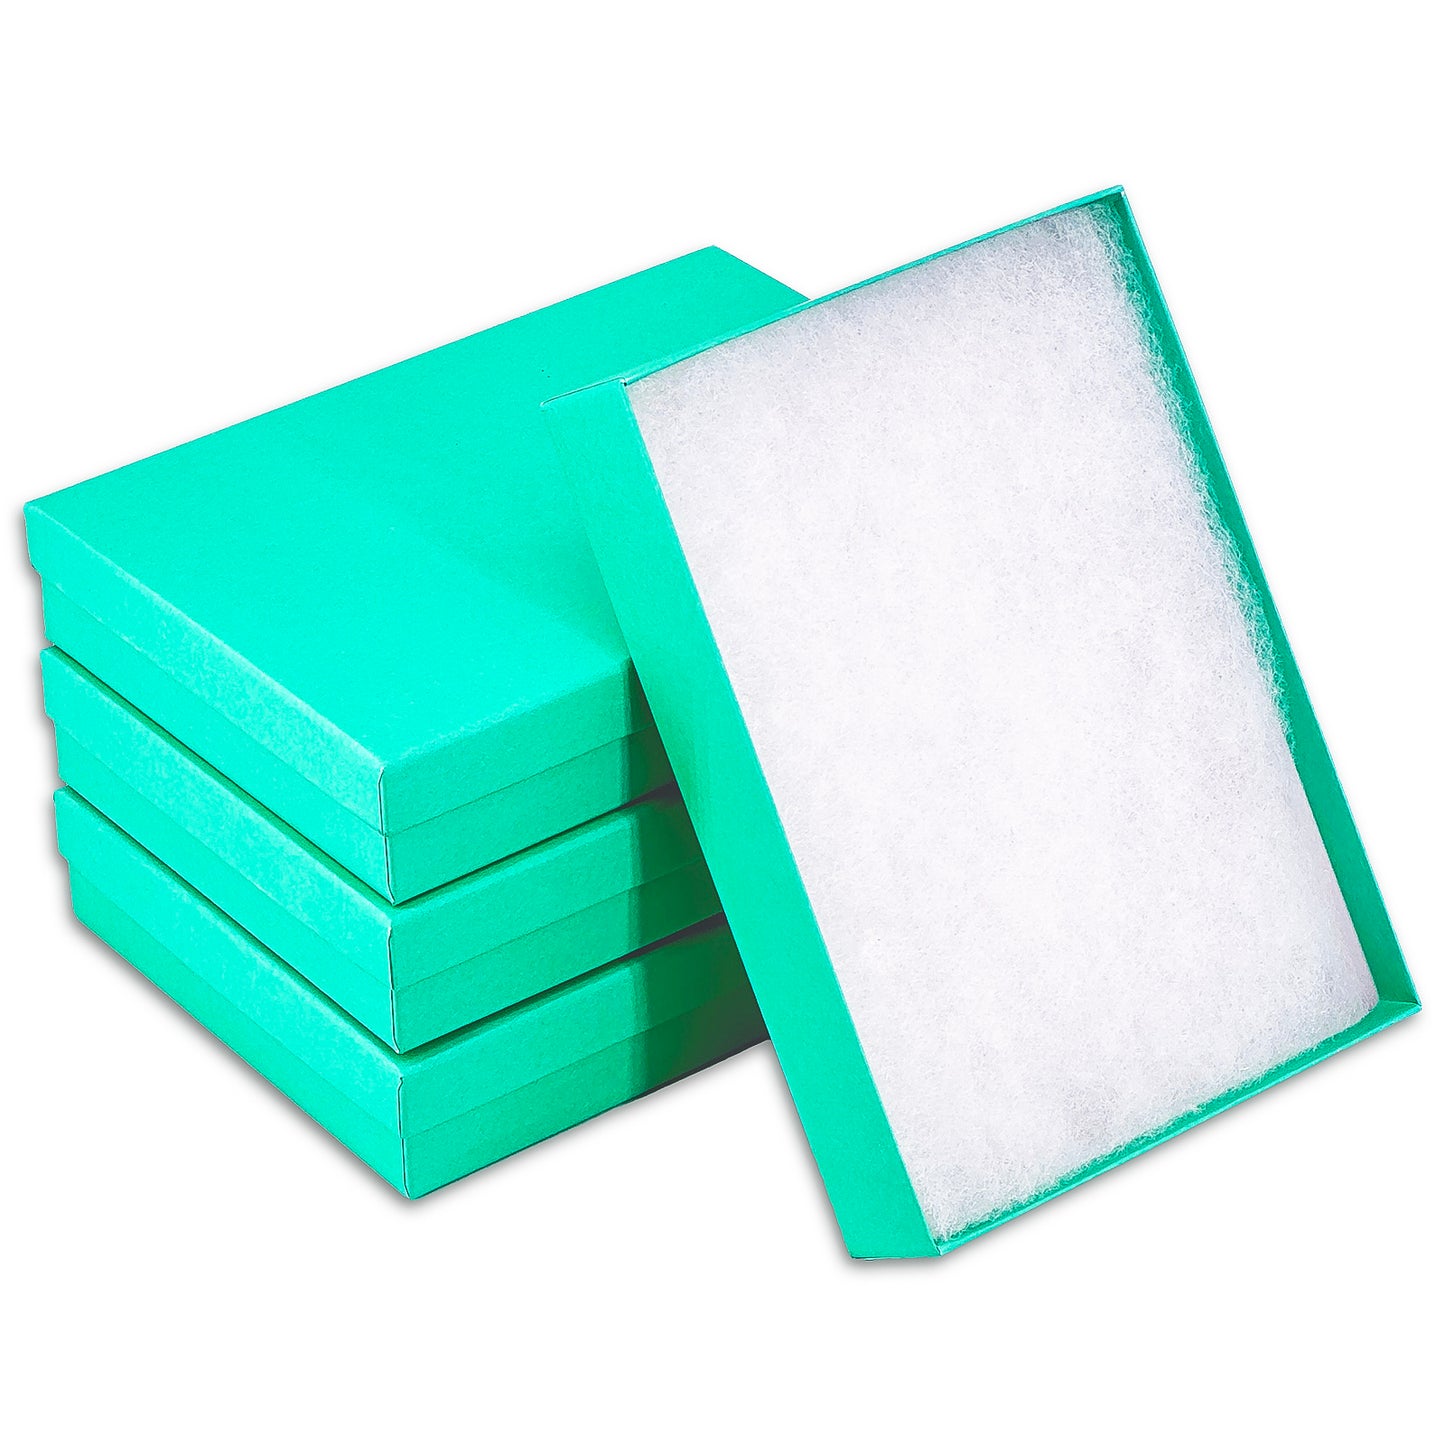 8 x 5 x 1 1/4"H Teal Cotton Filled Paper Box